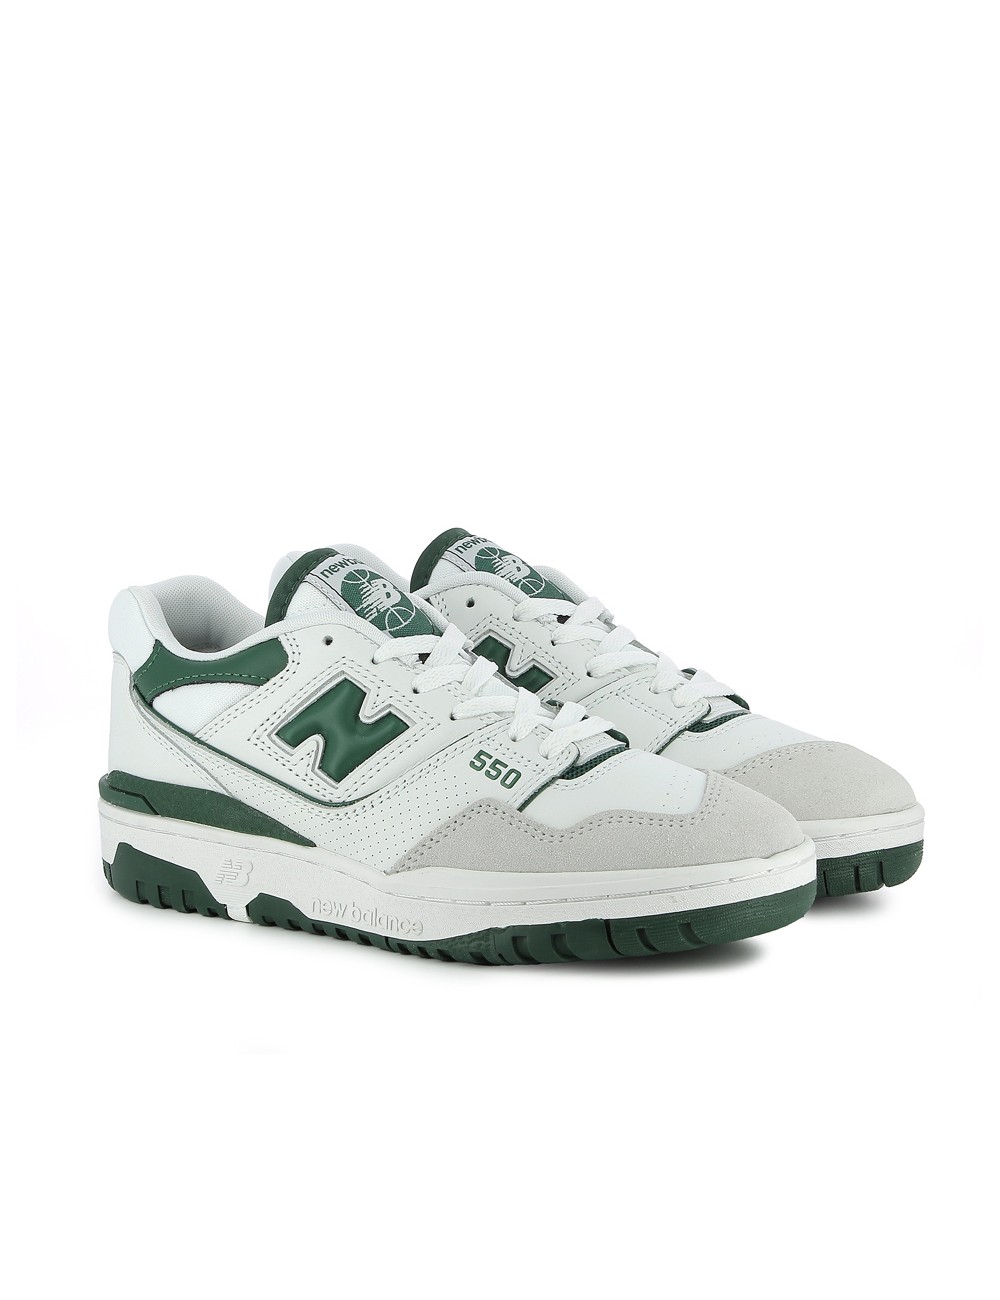 New Balance Bb550 Wt1 White Forest Green